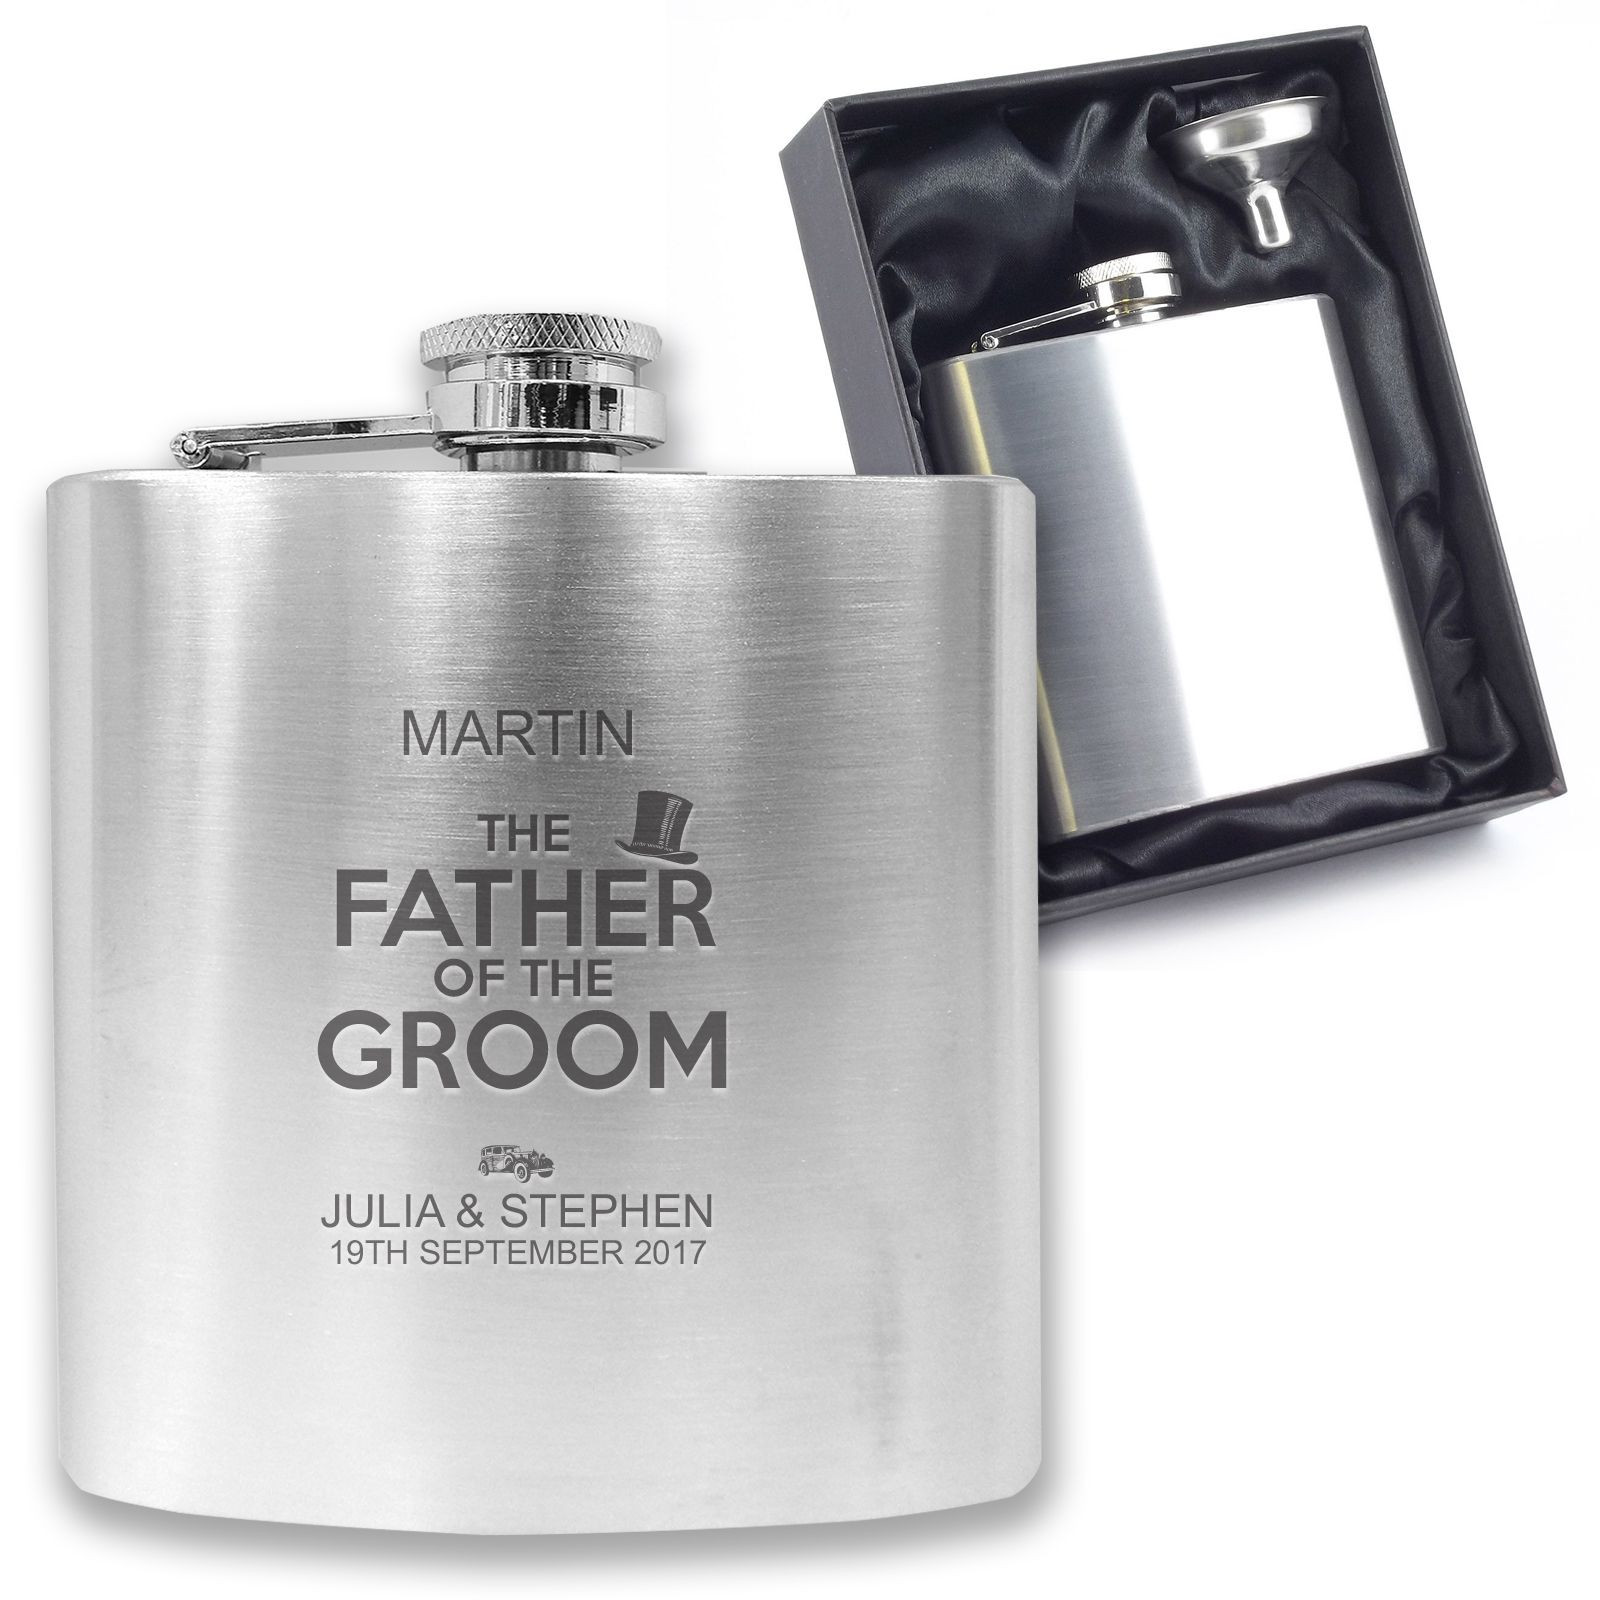 Father Of The Groom Gift Ideas
 Engraved FATHER OF THE GROOM hip flask wedding thank you